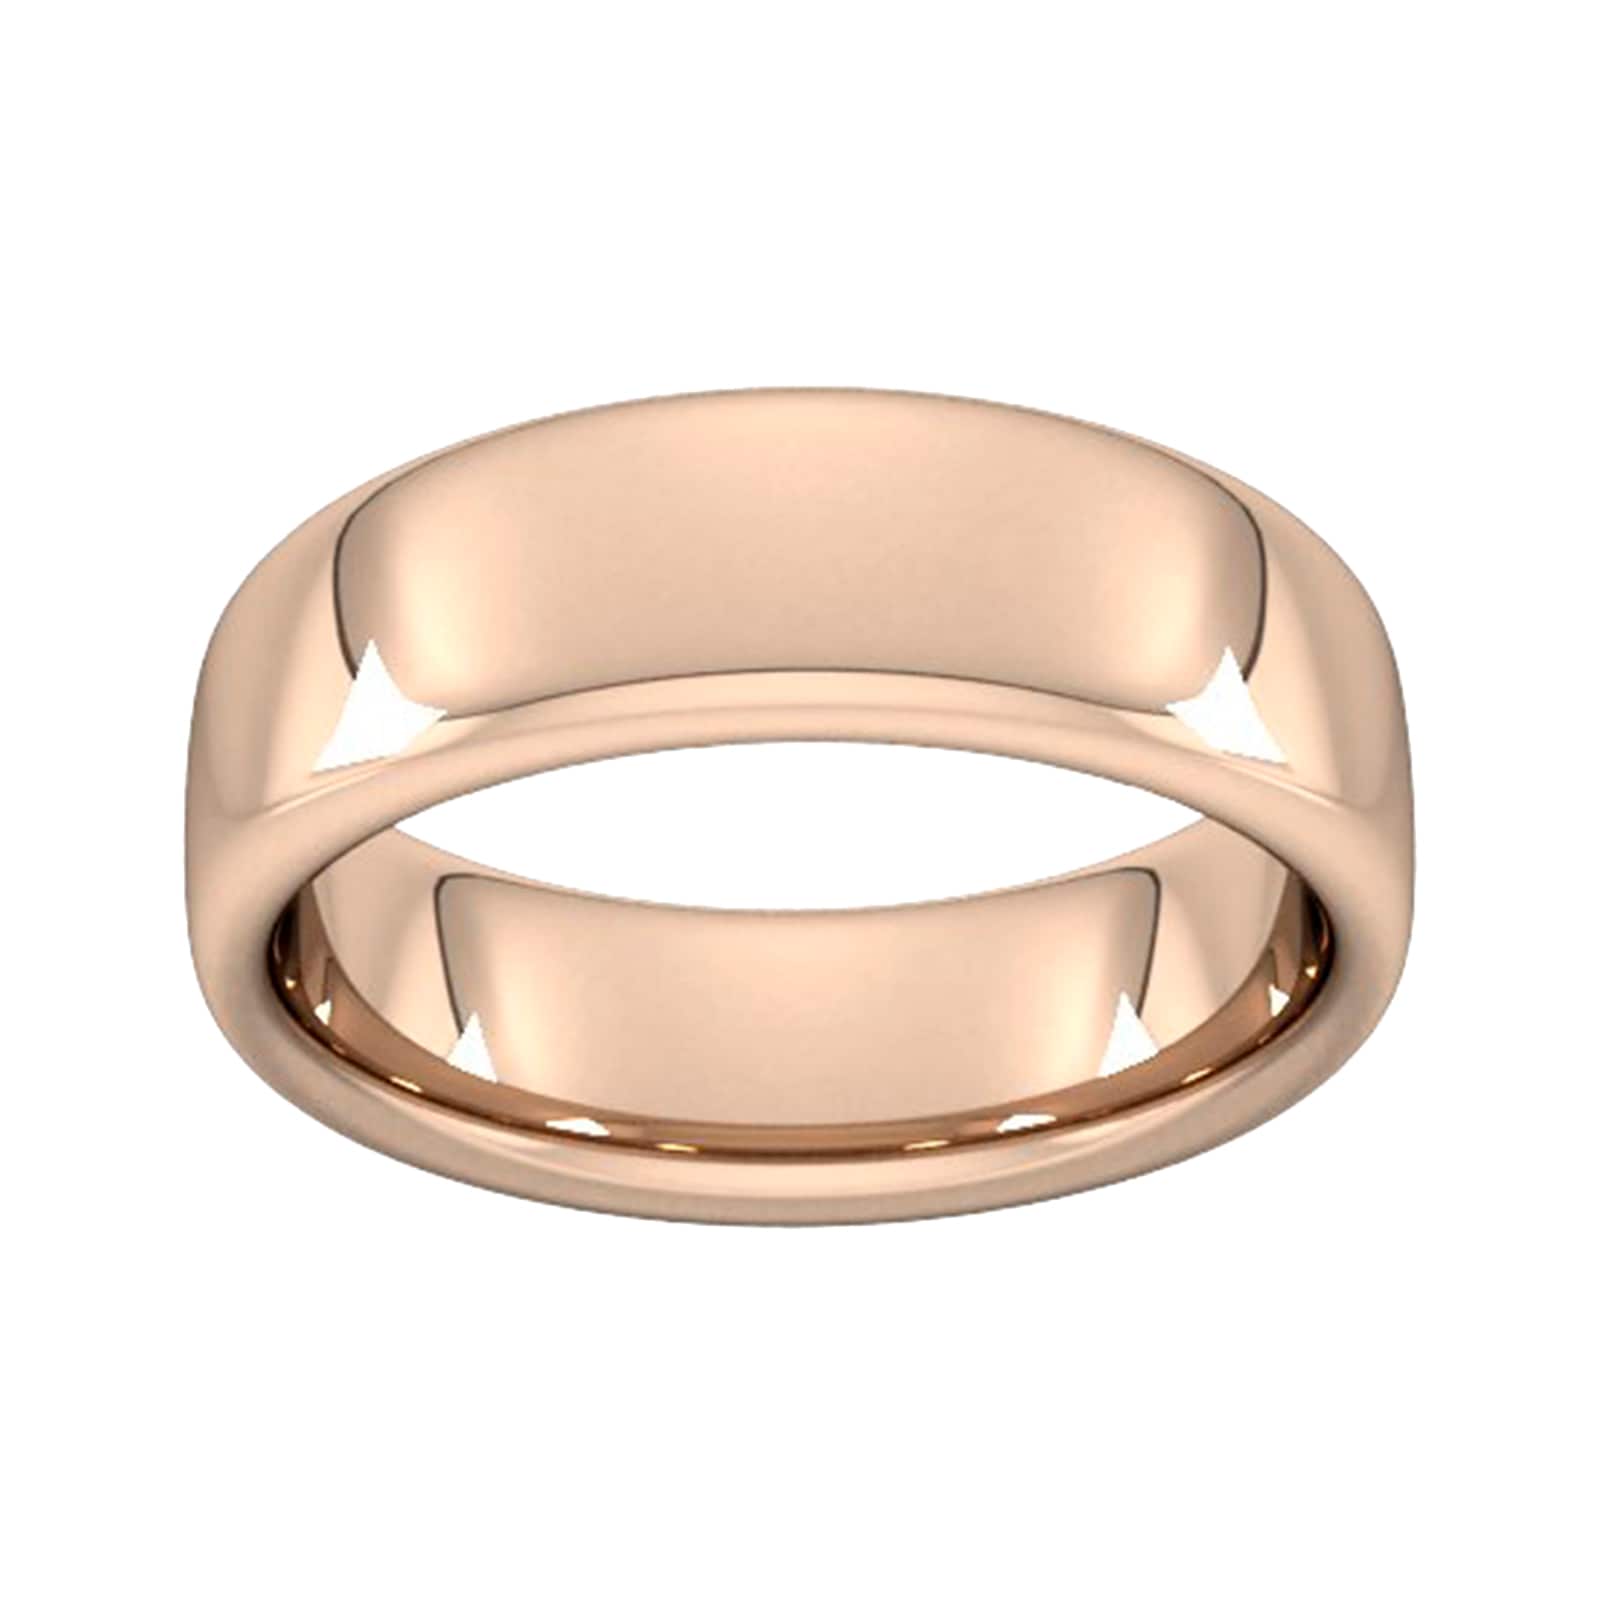 7mm Slight Court Extra Heavy Wedding Ring In 9 Carat Rose Gold - Ring Size L